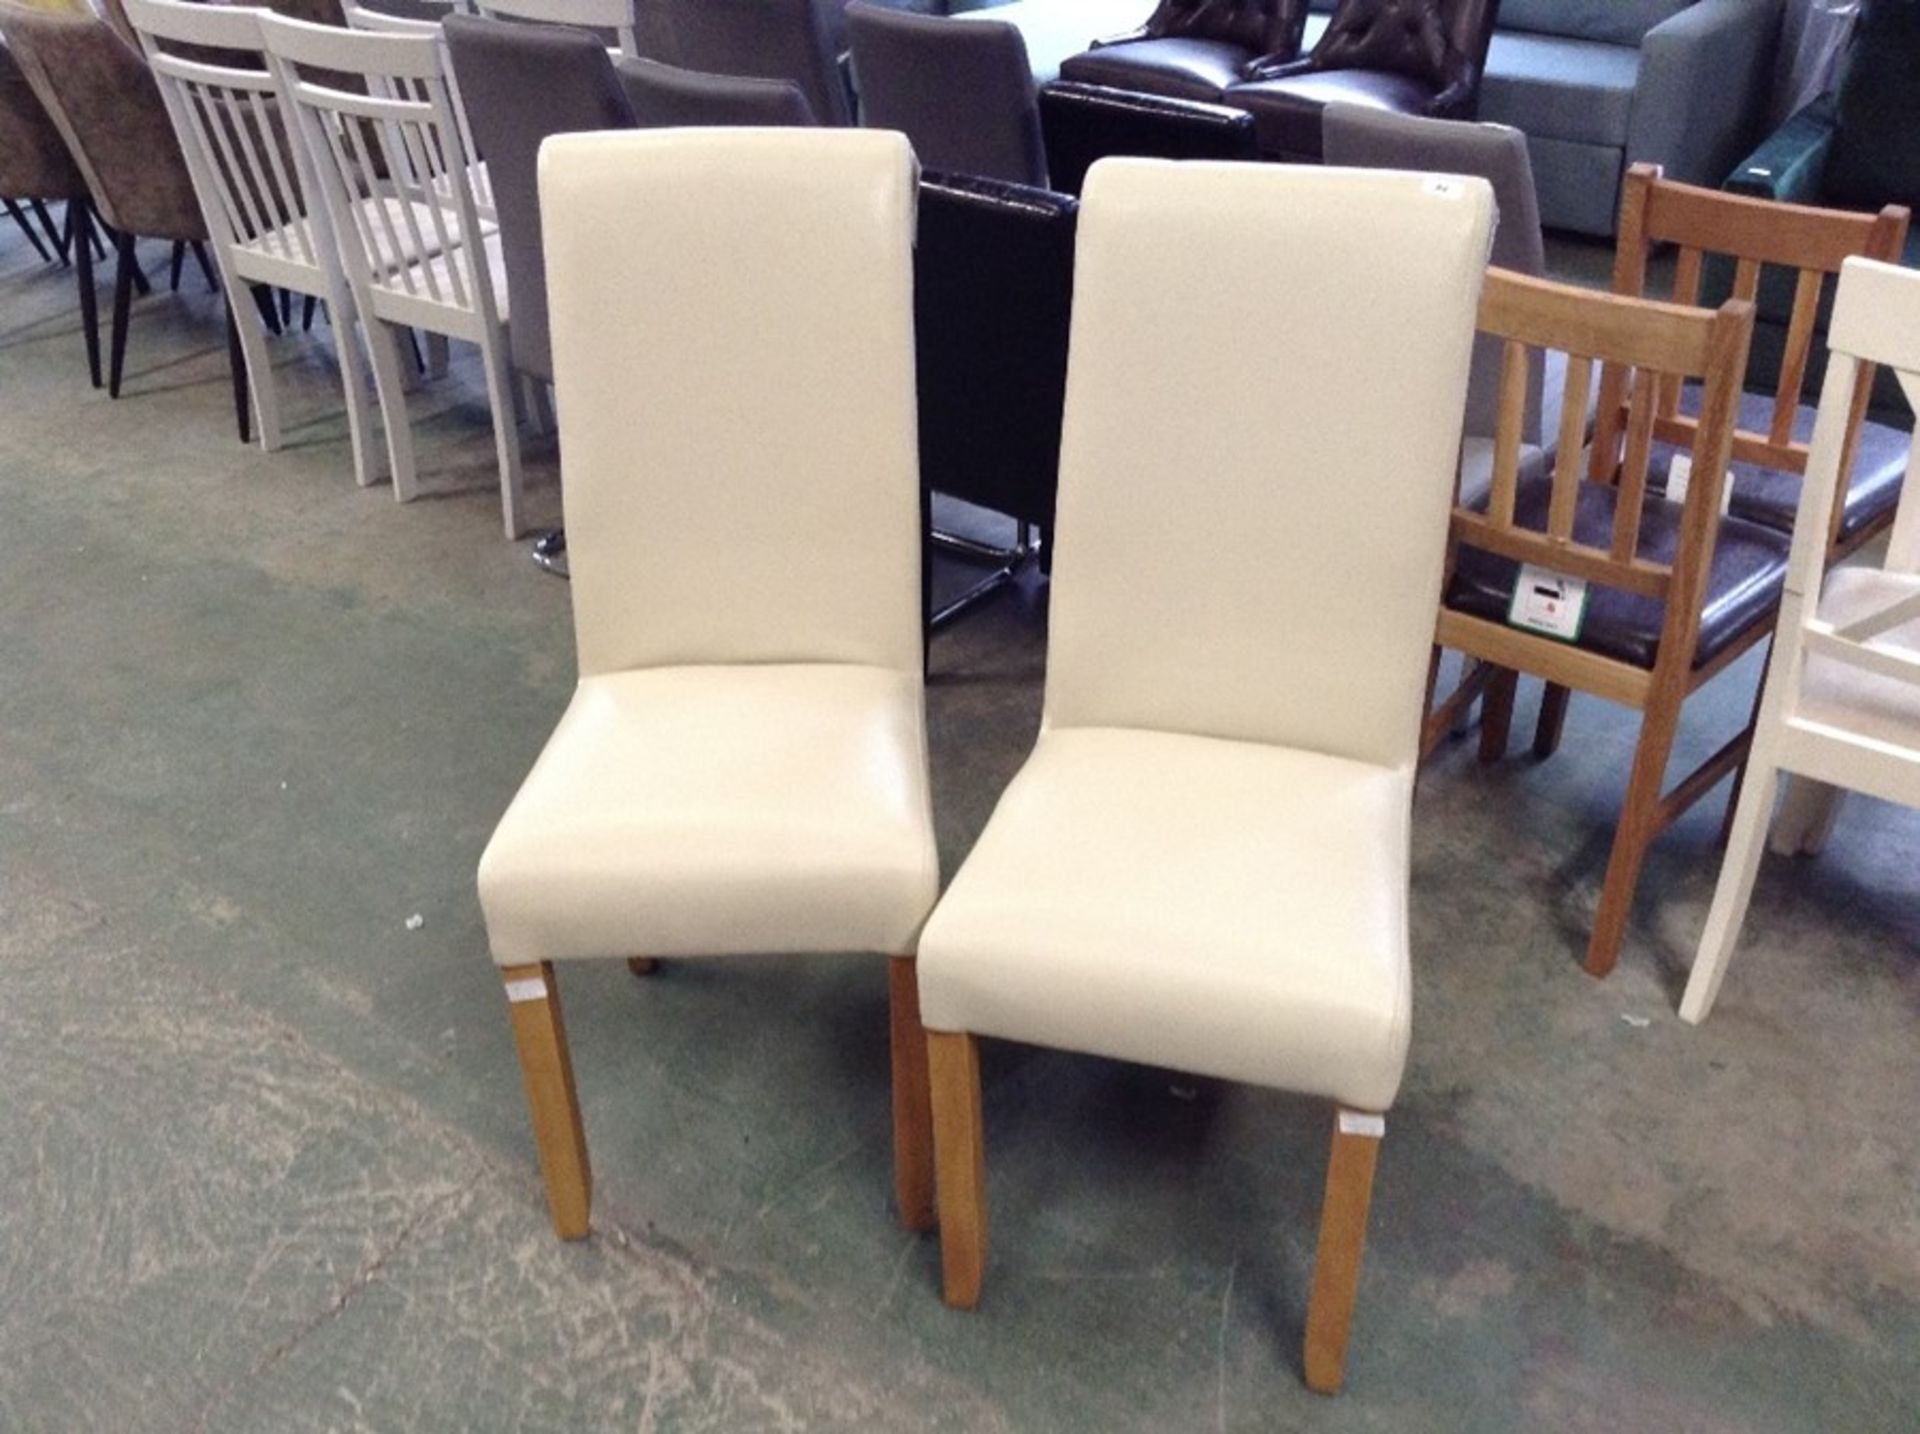 CARLOCK SET OF 2 DINING CHAIRS (22587-4, 22587-5)